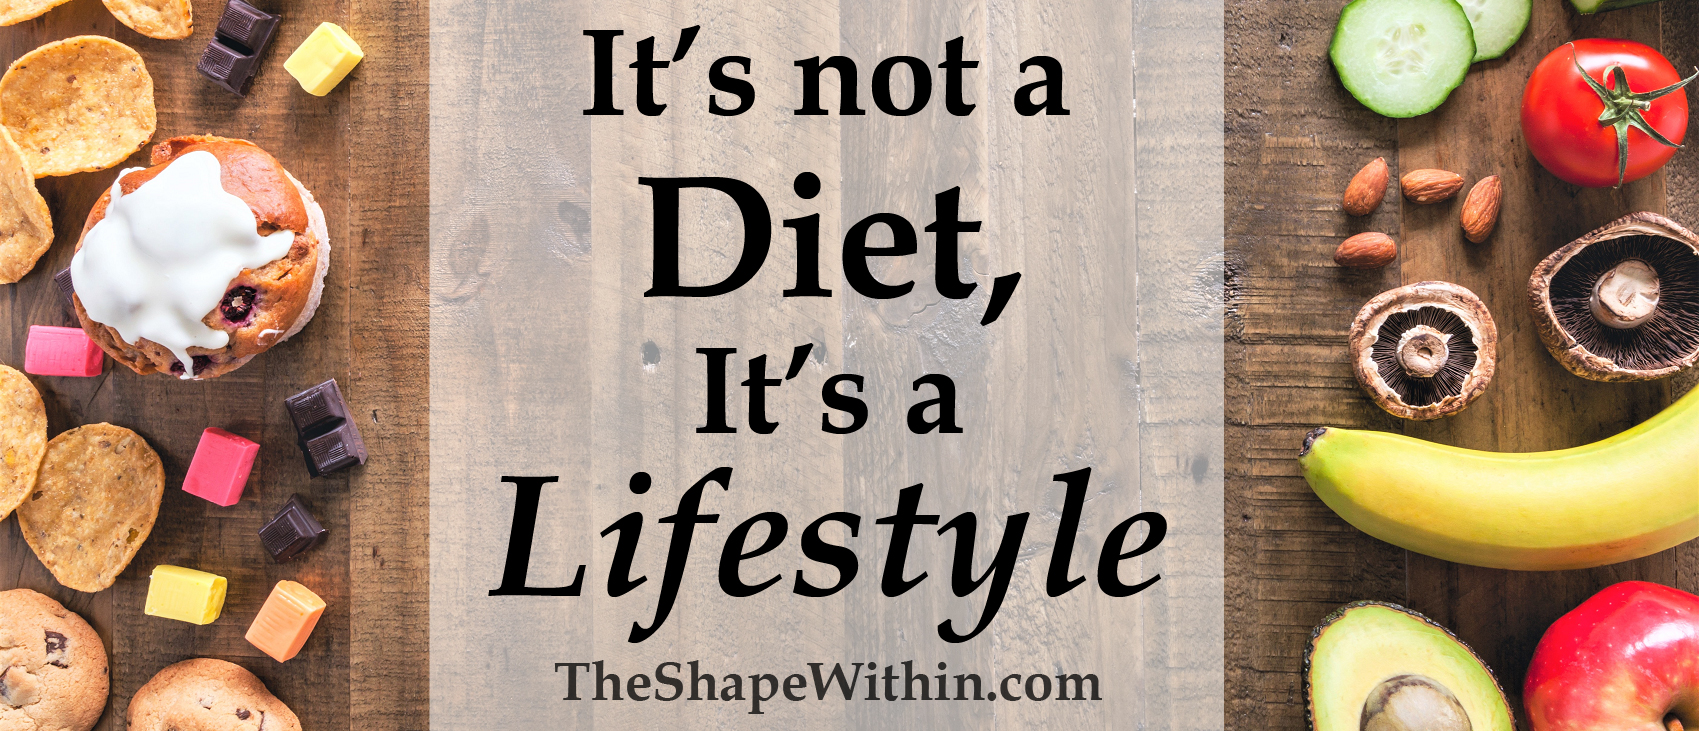 When eating healthy seems difficult and you are wondering how long it will take, it help to remember that with concern to healthy weight loss, it's not a diet, it's a lifestyle